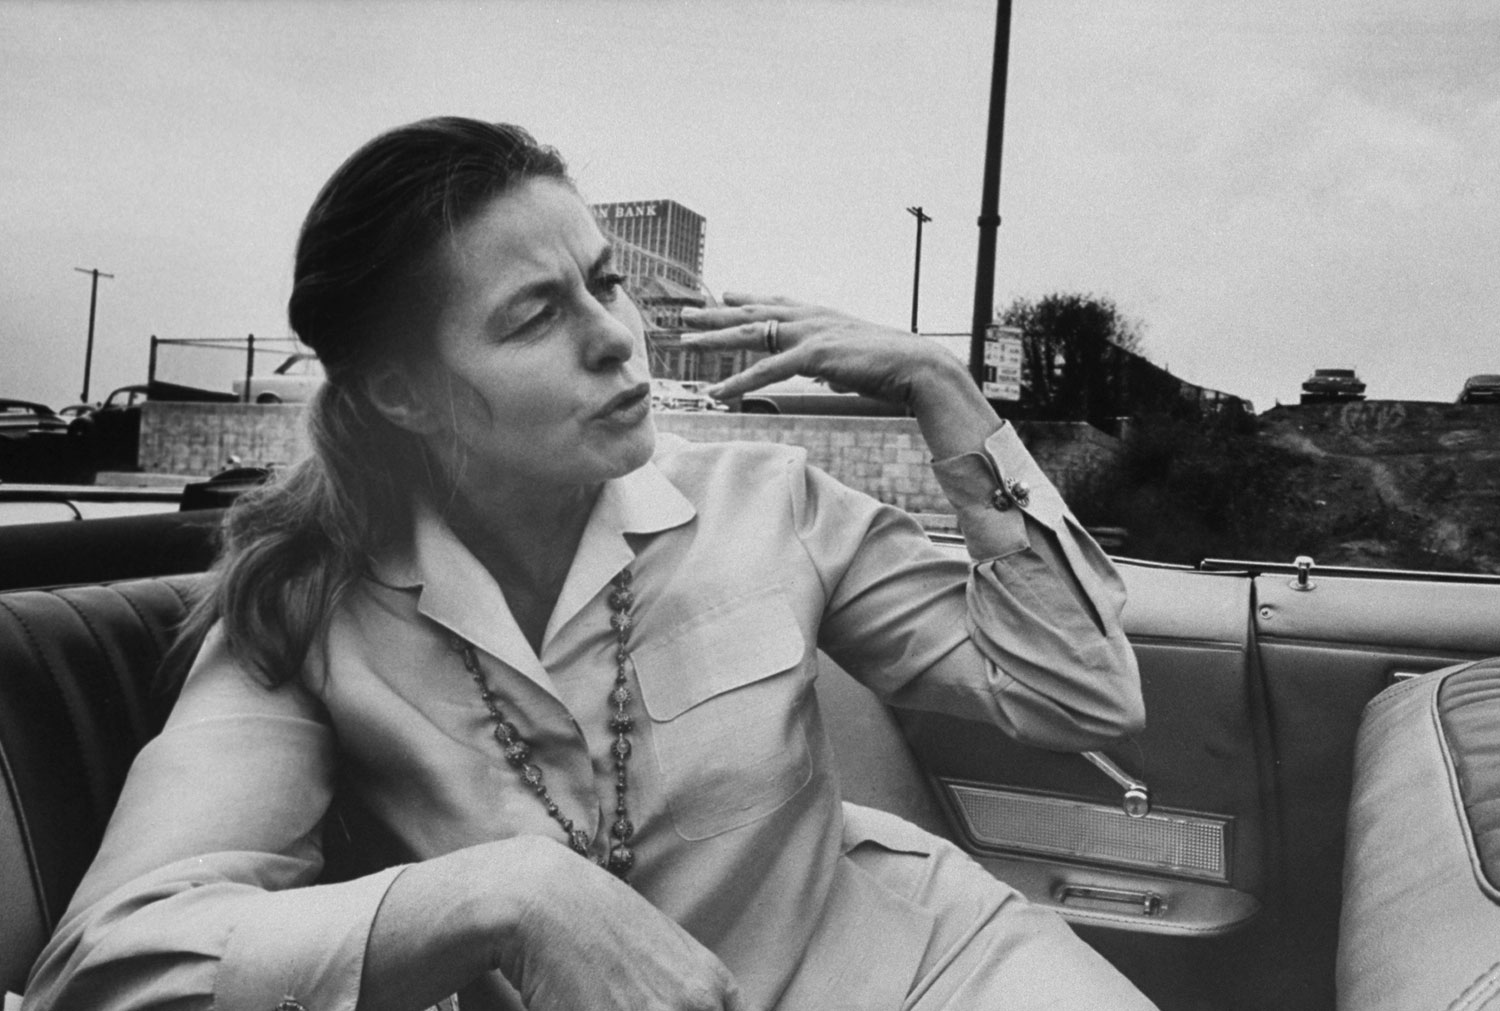 Absorbed in conversation, 52-year-old Ingrid Bergman rides through Los Angeles on her way to the theater where she'll perform in Eugene O'Neill's play, More Stately Mansions, in 1967.